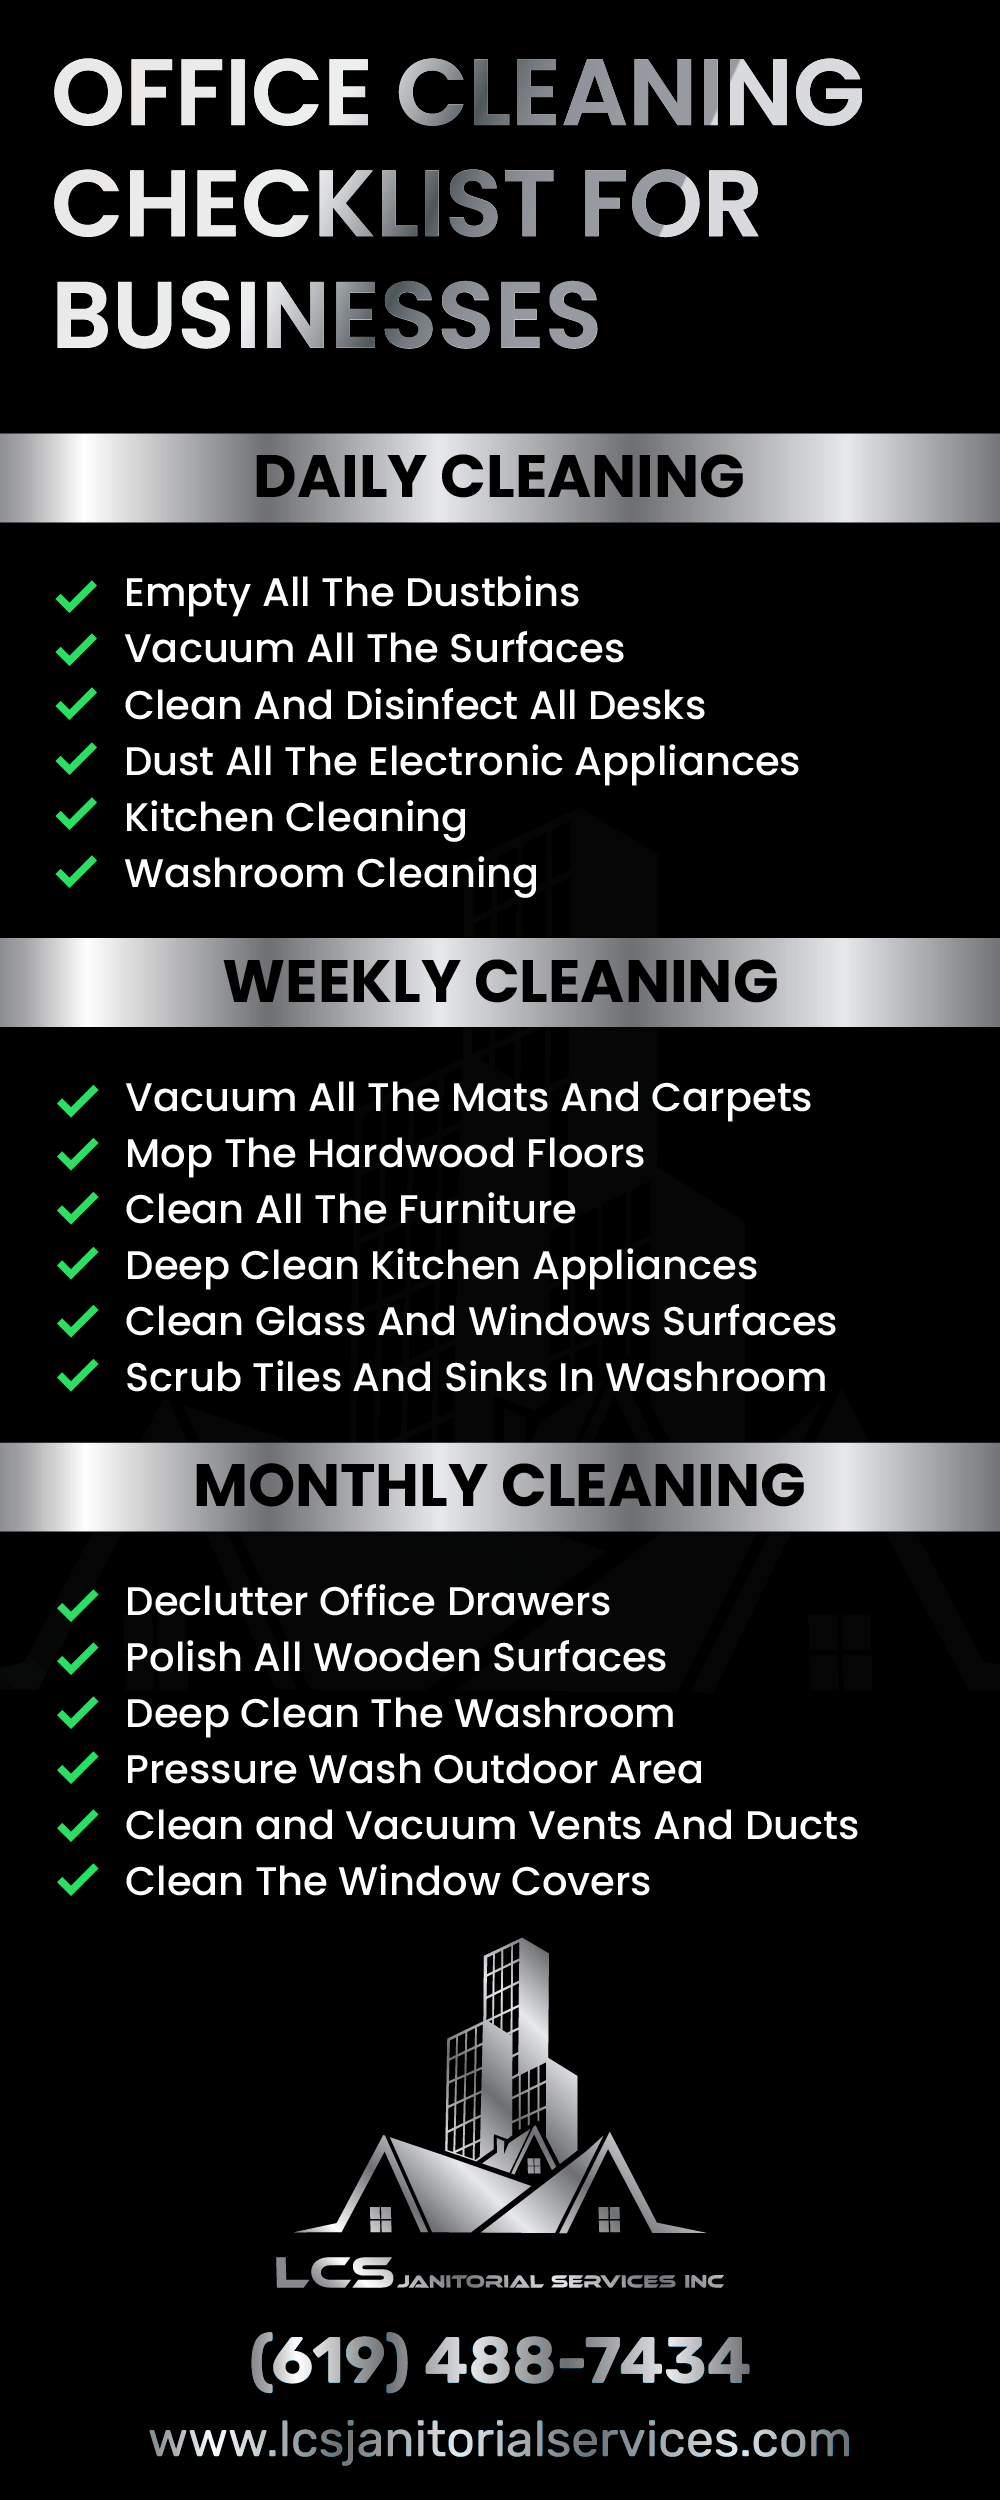 Office Cleaning Checklist for Businesses